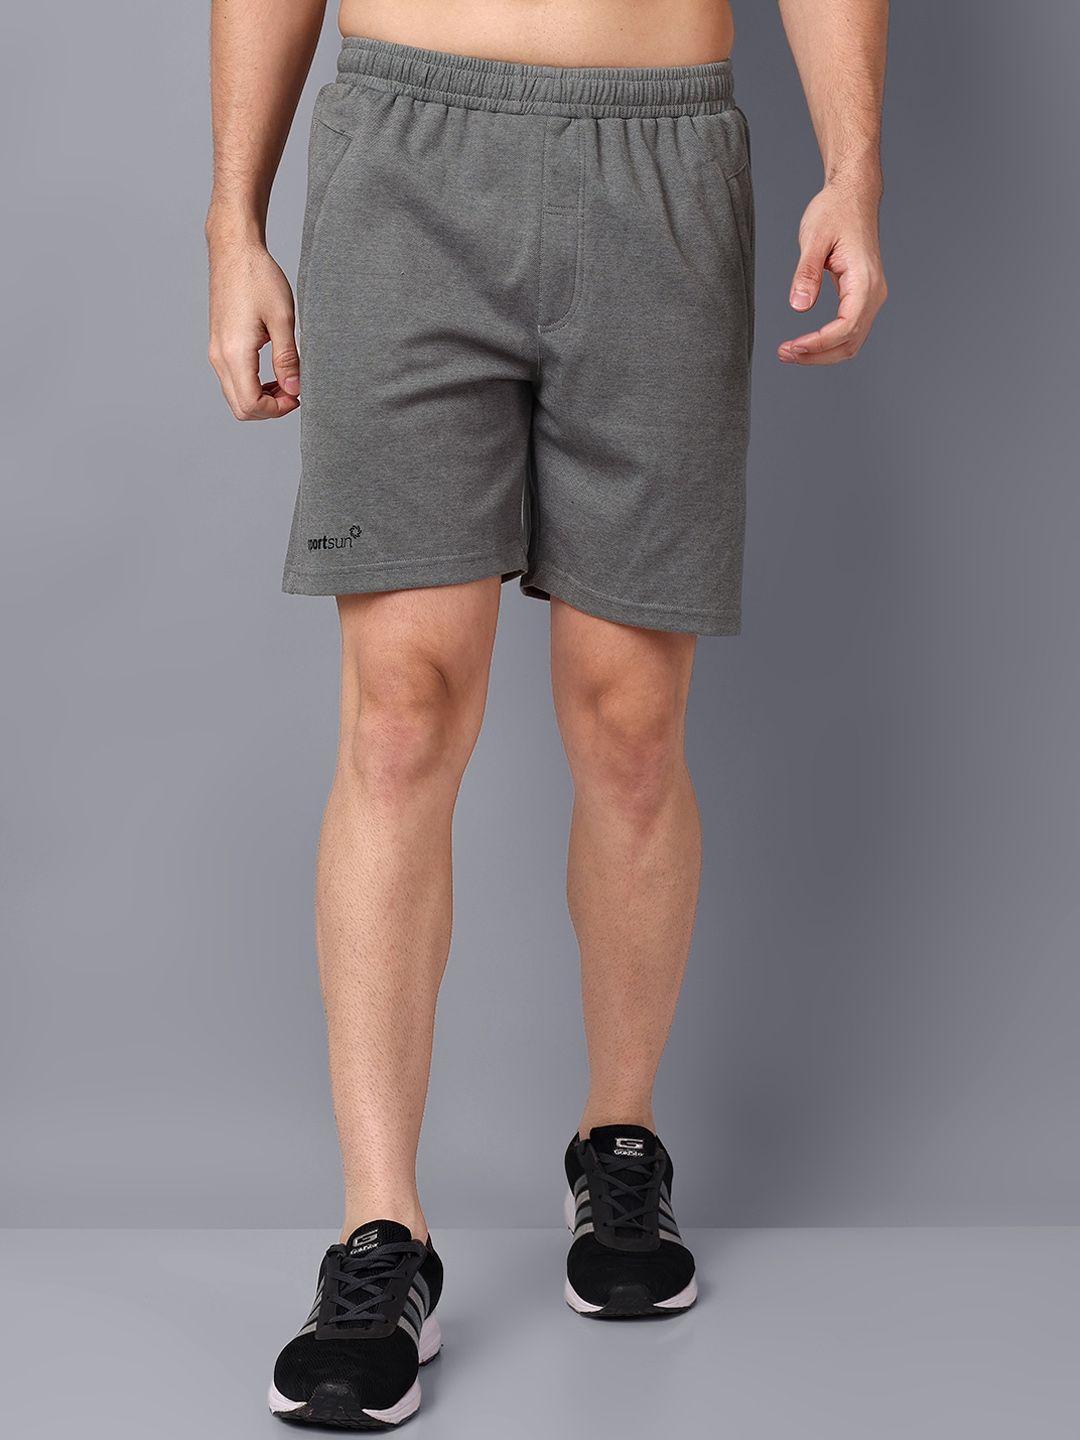 sport sun mid rise outdoor sports shorts